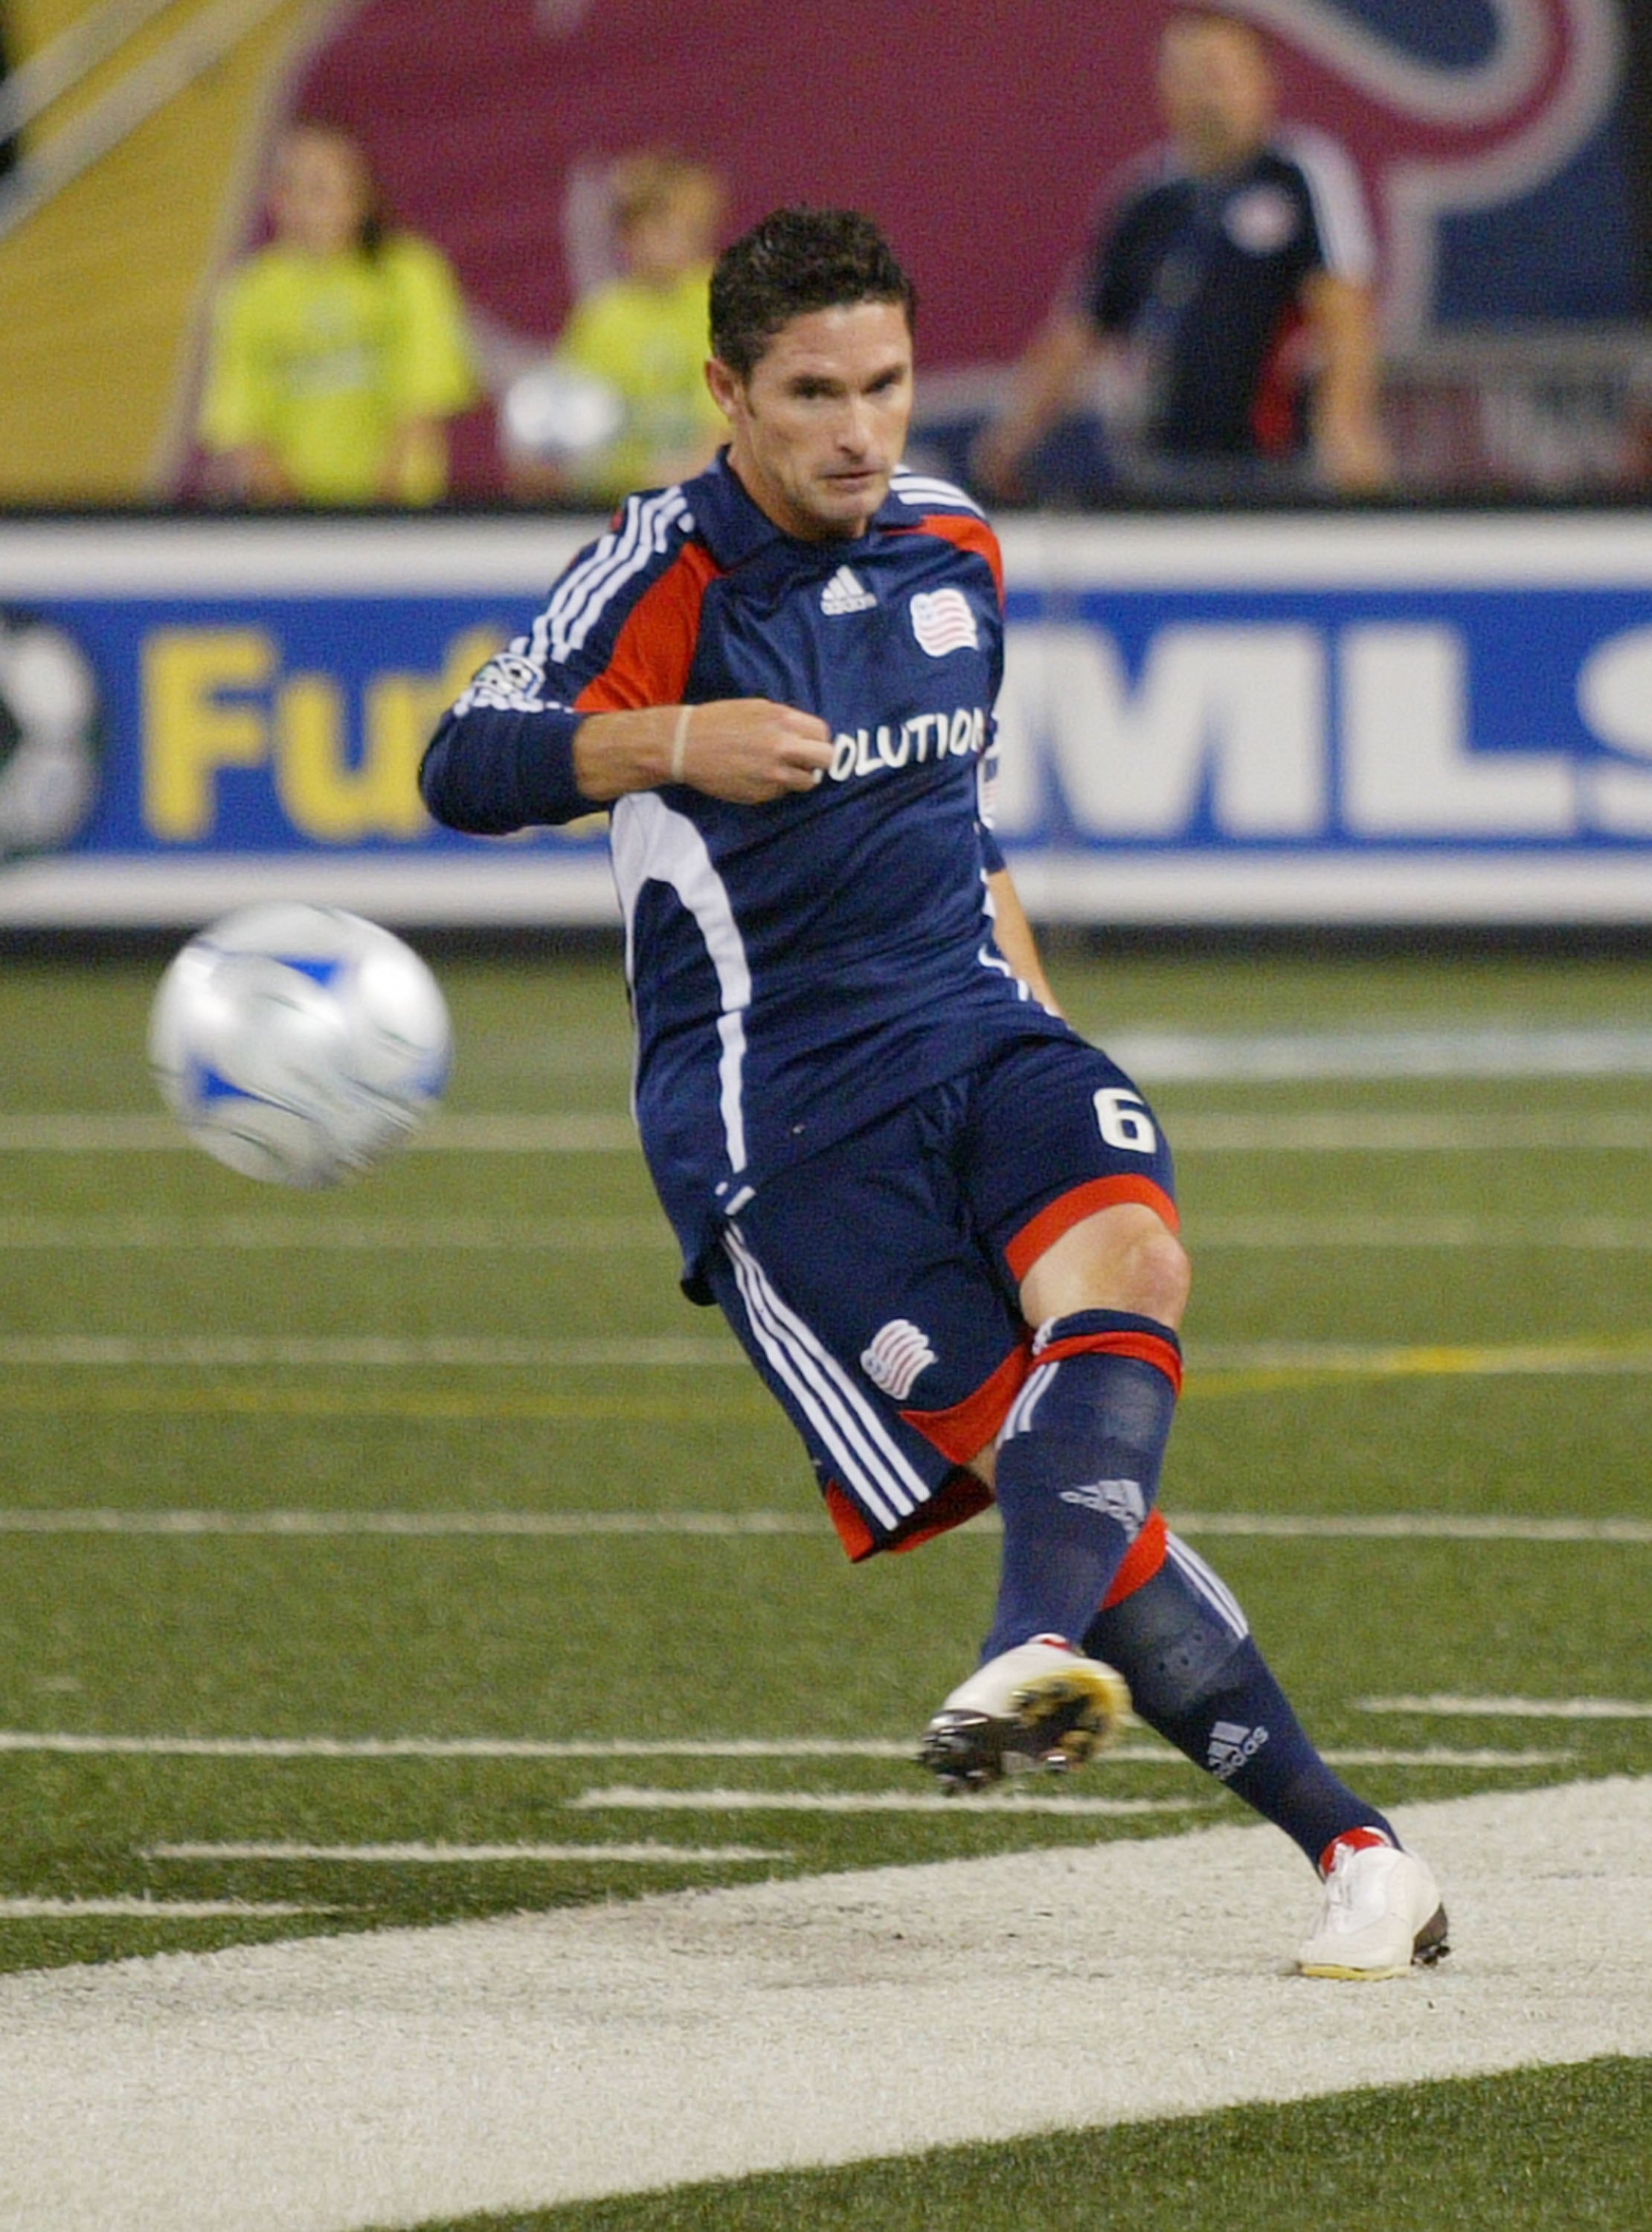 EAST RUTHERFORD, NJ - SEPTEMBER 18: Jay Heaps #6 of the New England Revolution plays the  ball against the New York Red Bulls during their game at Giants Stadium on September 18, 2009 in East Rutherford, New Jersey. The Red Bulls and the Revolution played